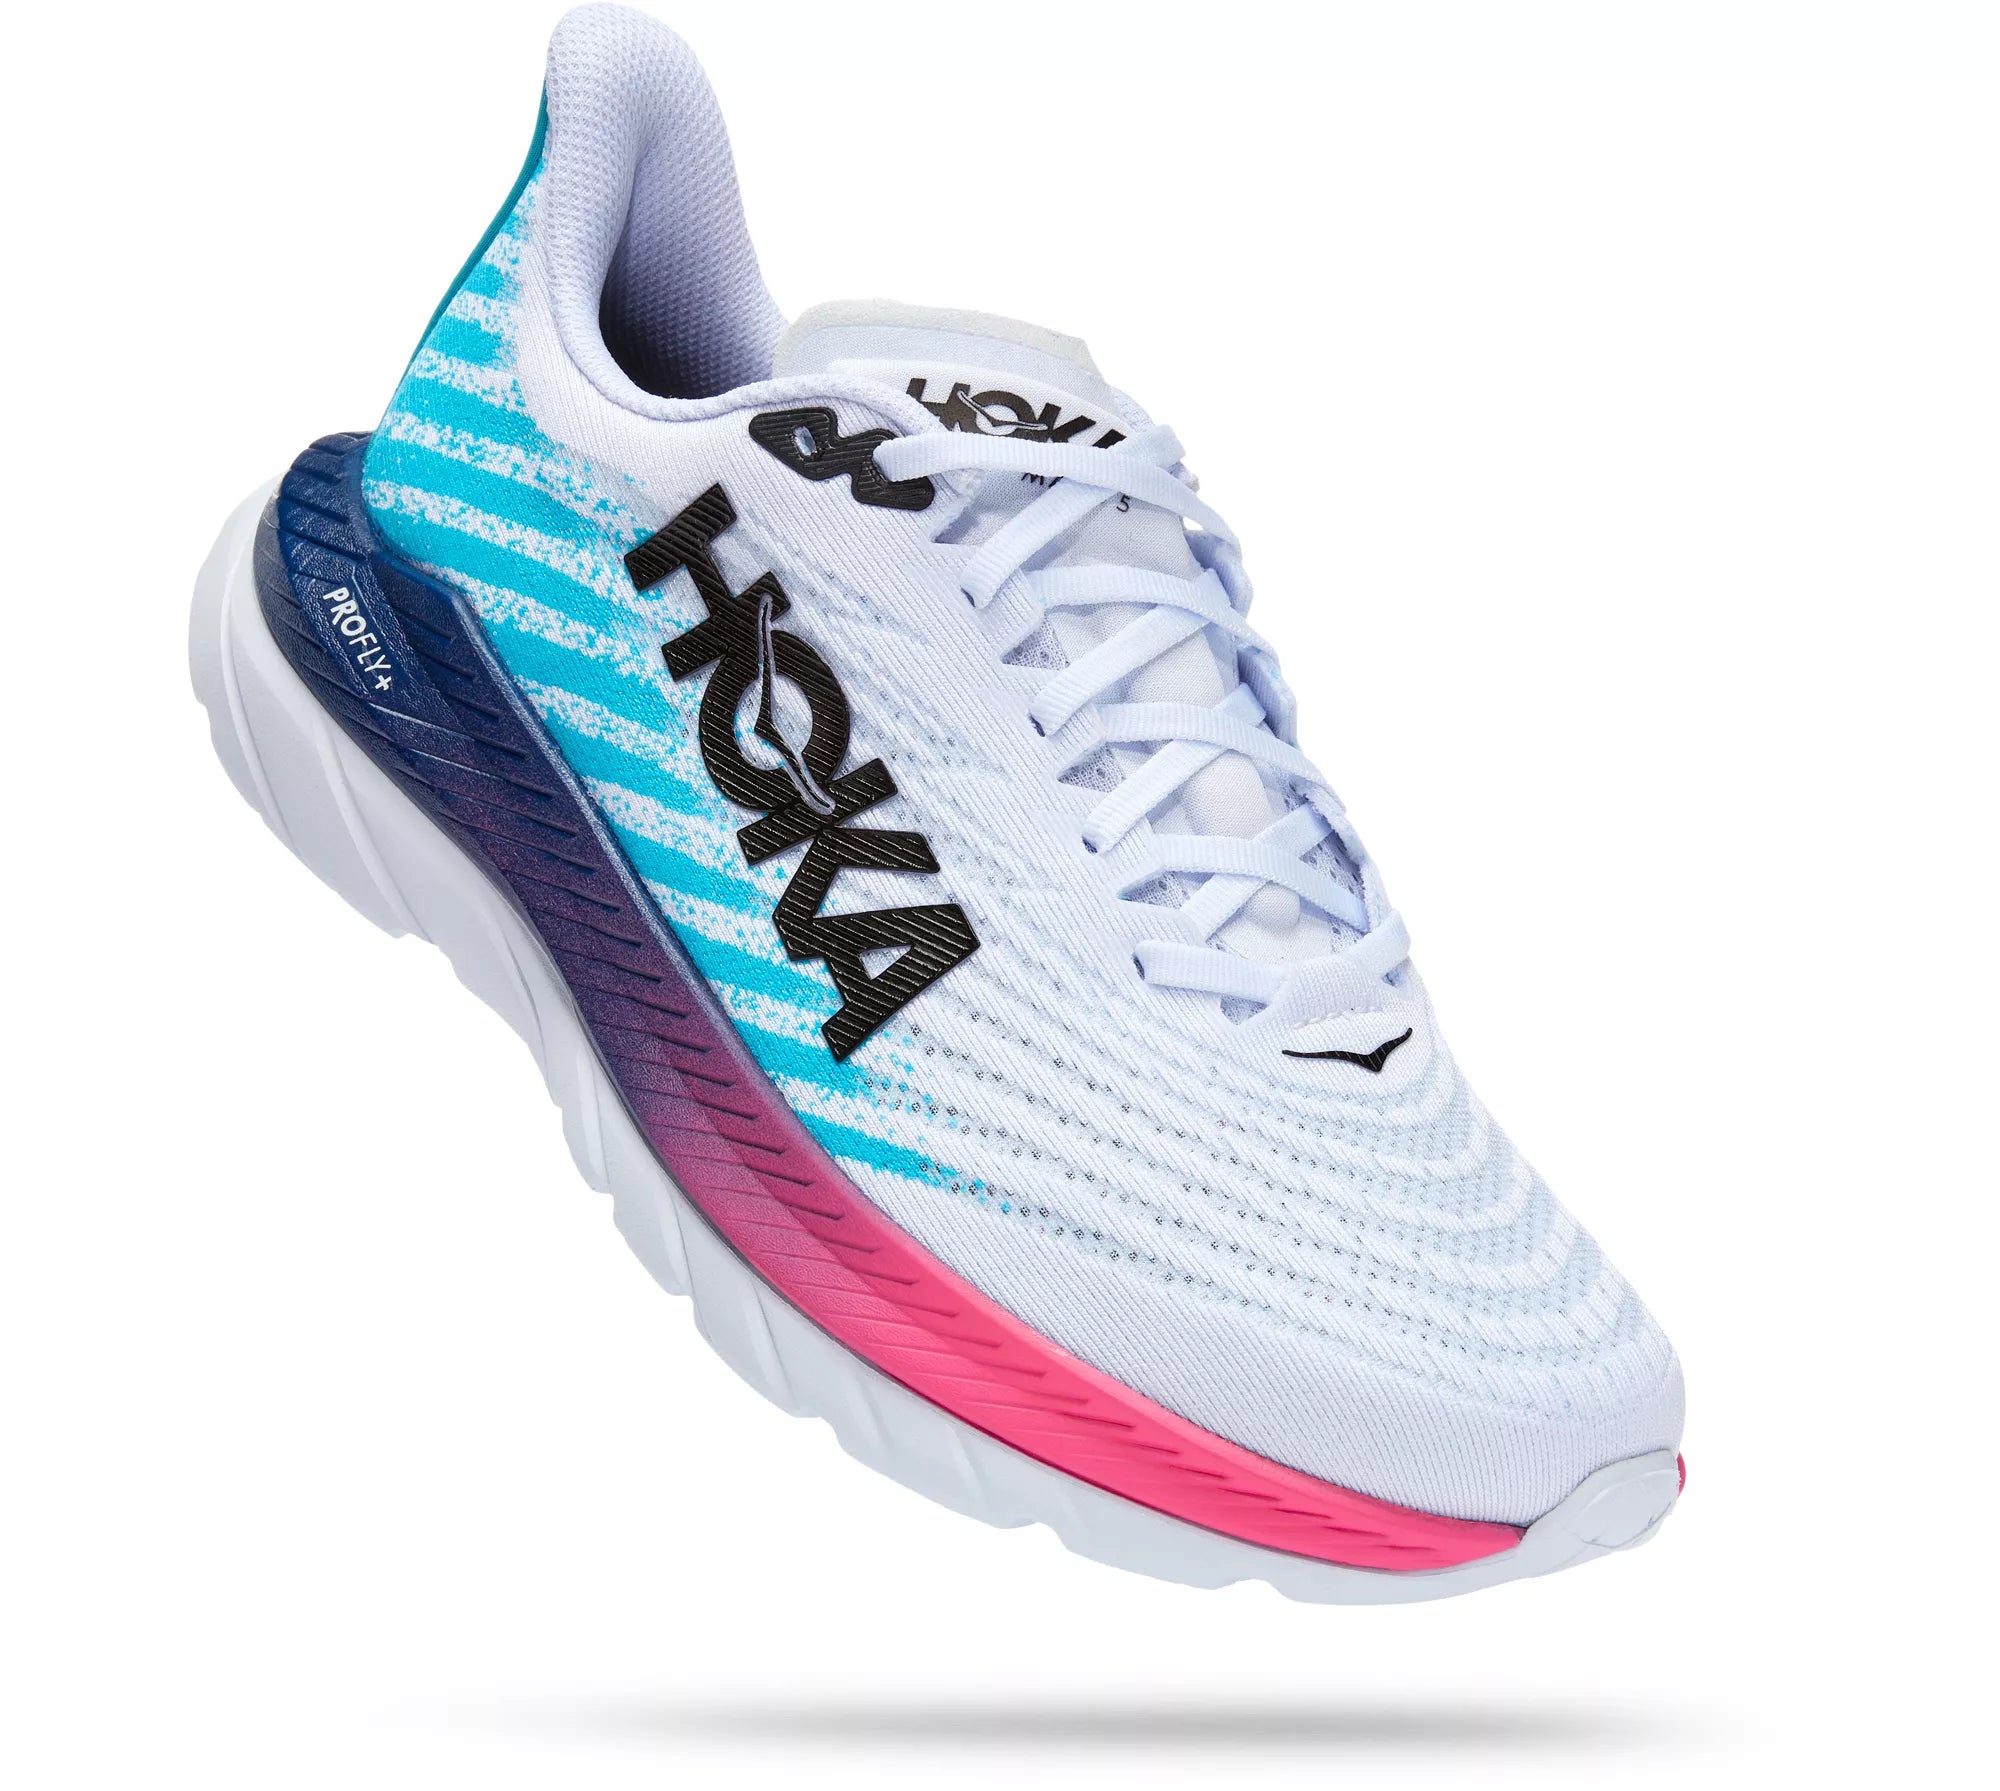 Lateral angled view of the Men's HOKA Mach 5 in the color White/Scuba